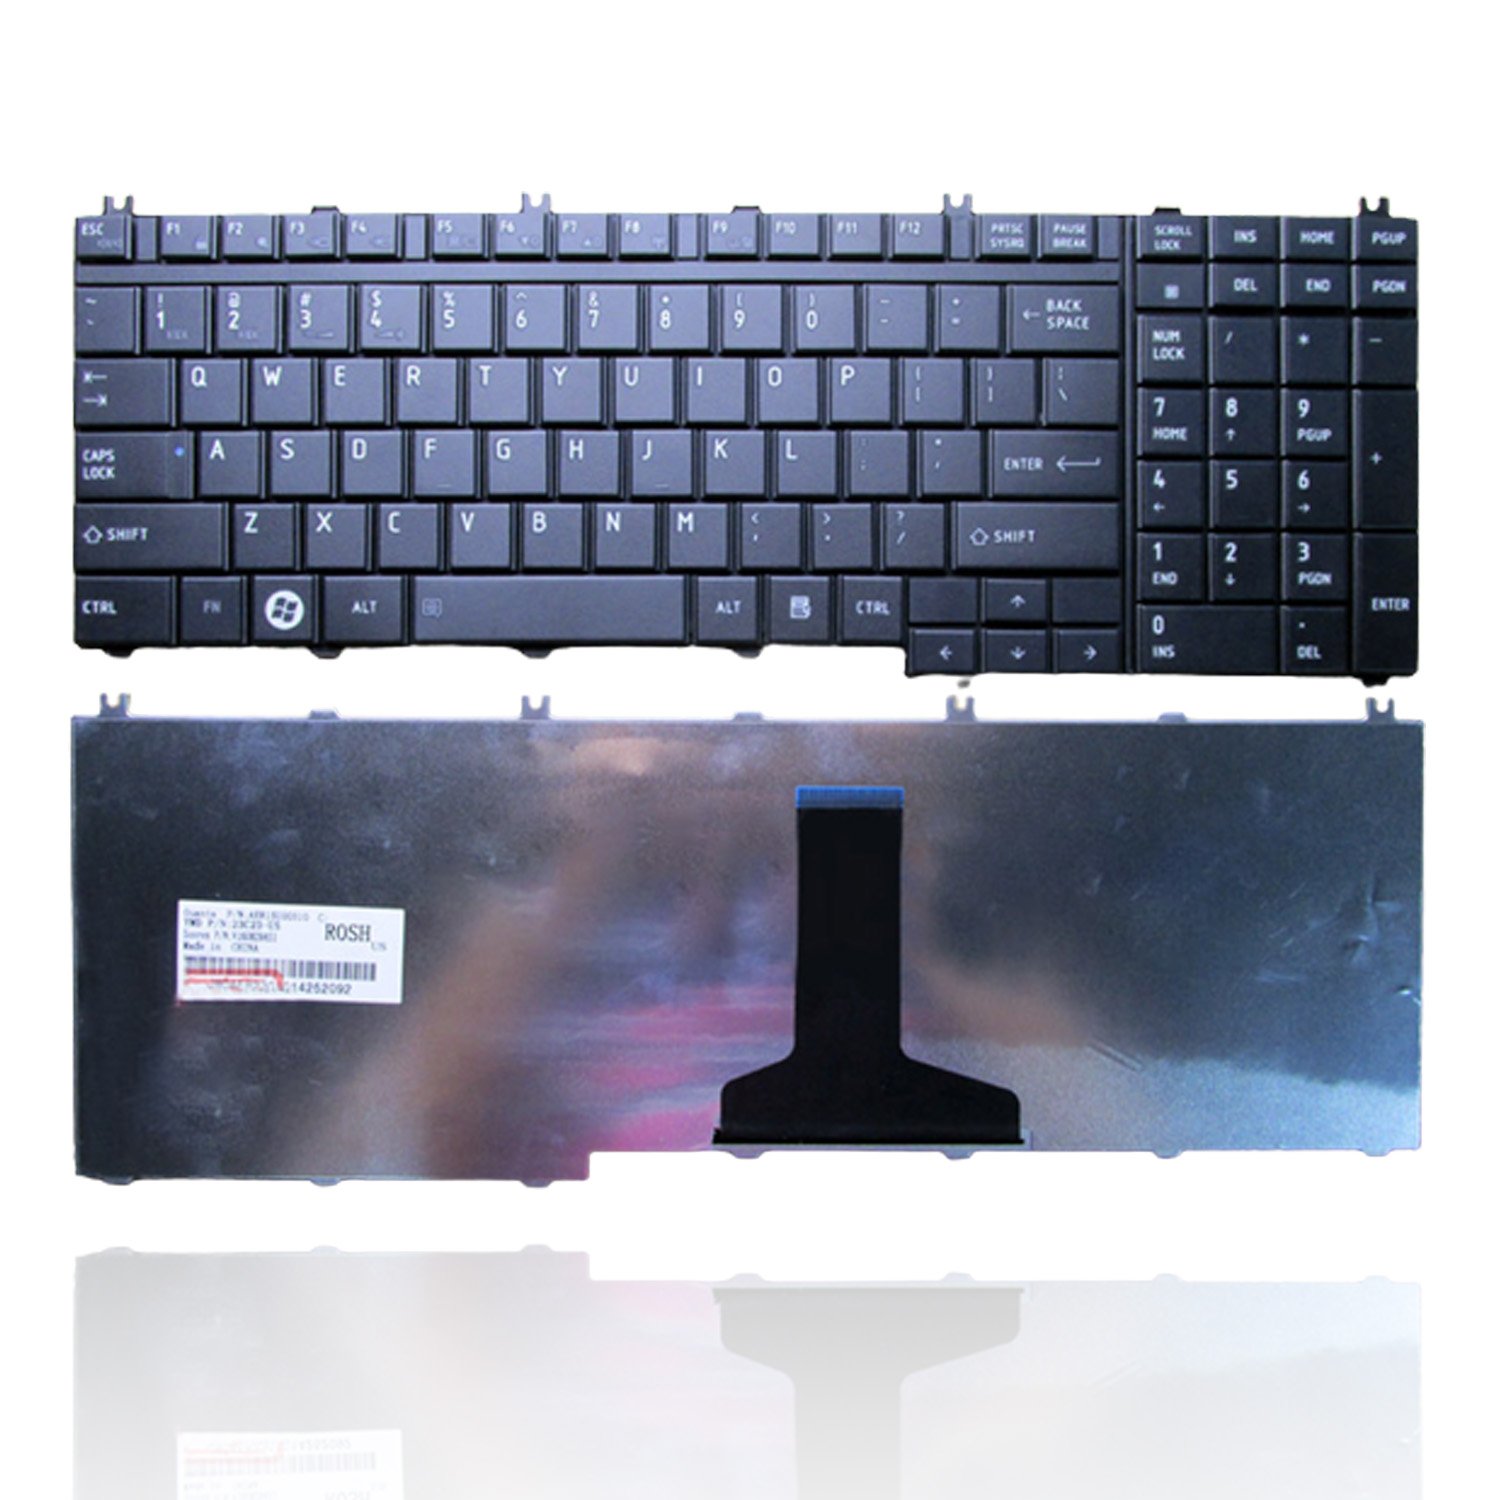 Standard 15-Inch Toshiba A500 Laptop Keyboard - Reliable and Efficient Typing